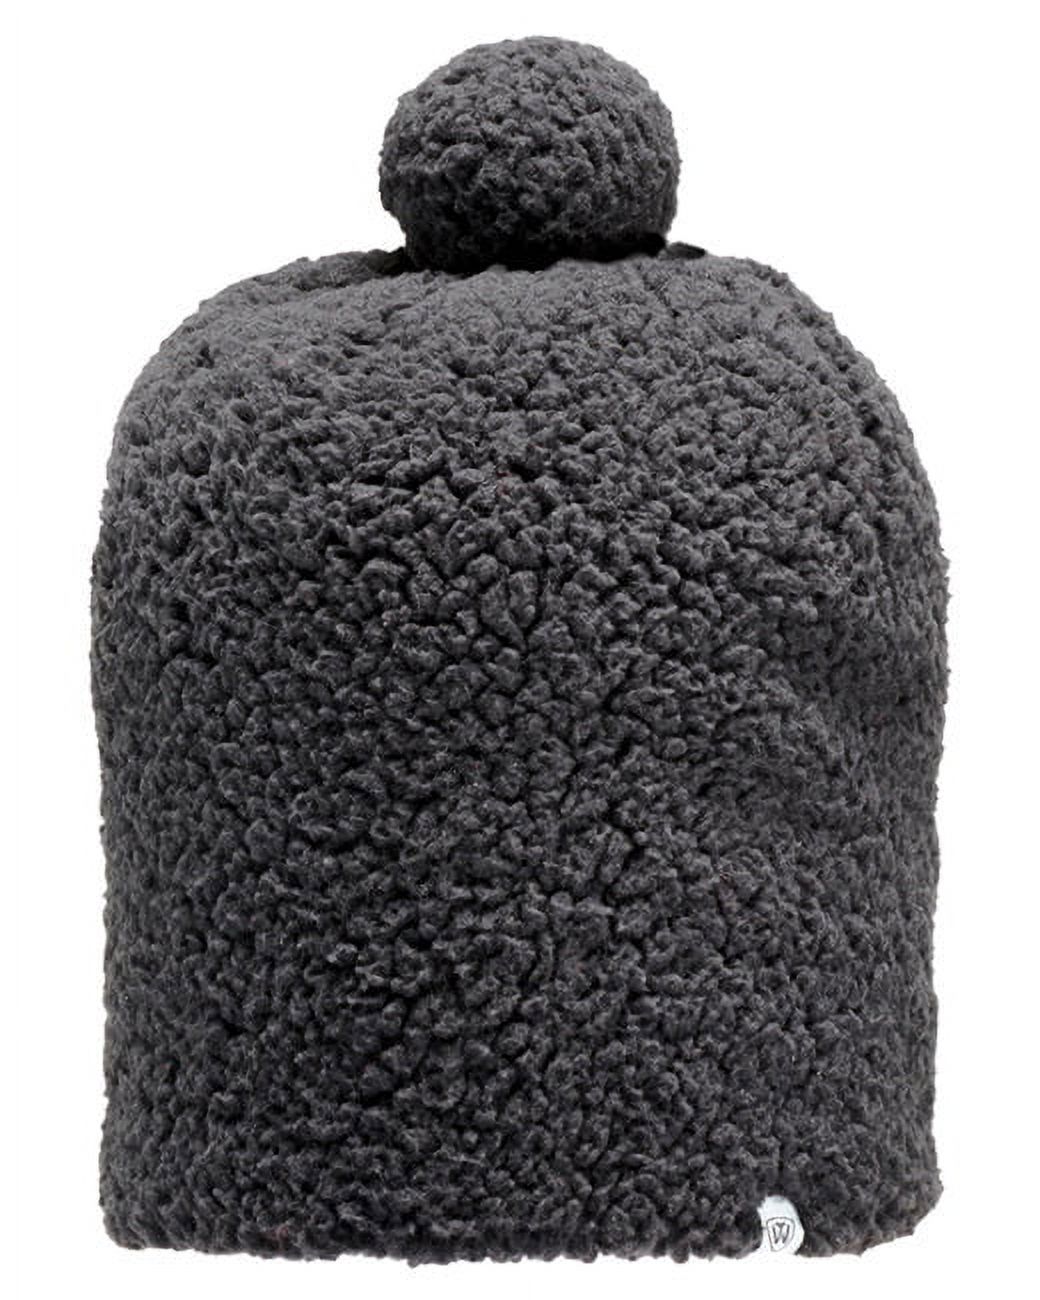 Top Of The World TW5006 Epic Sherpa Knit Hat - image 1 of 2